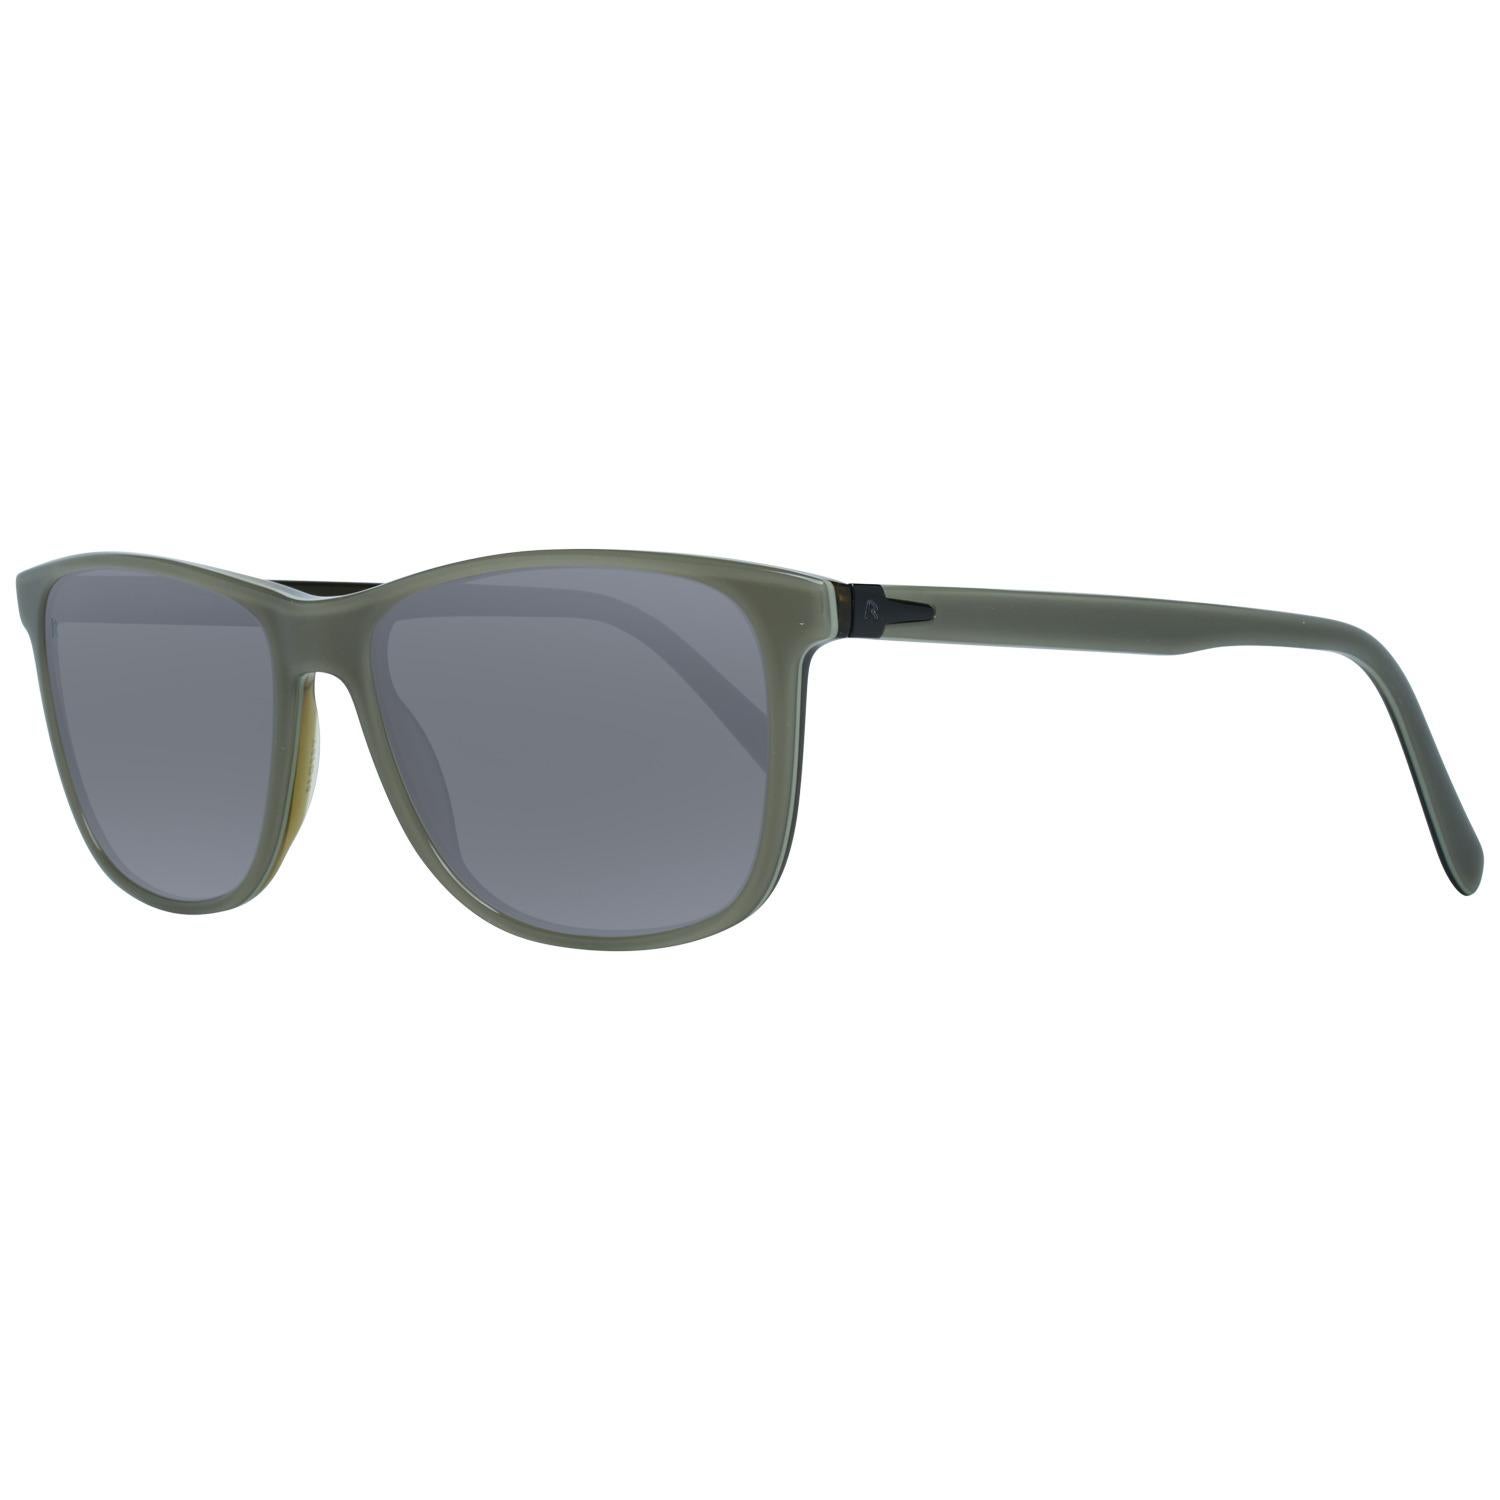 Details
MATERIAL: Acetate
COLOR: Olive
MODEL: R3281-C-5716-145-V425-E49-POL
GENDER: Adult Unisex
COUNTRY OF MANUFACTURE: China
TYPE: Sunglasses
ORIGINAL CASE?: Yes
STYLE: Oval
OCCASION: Casual
FEATURES: Lightweight
LENS COLOR: Grey
LENS TECHNOLOGY: